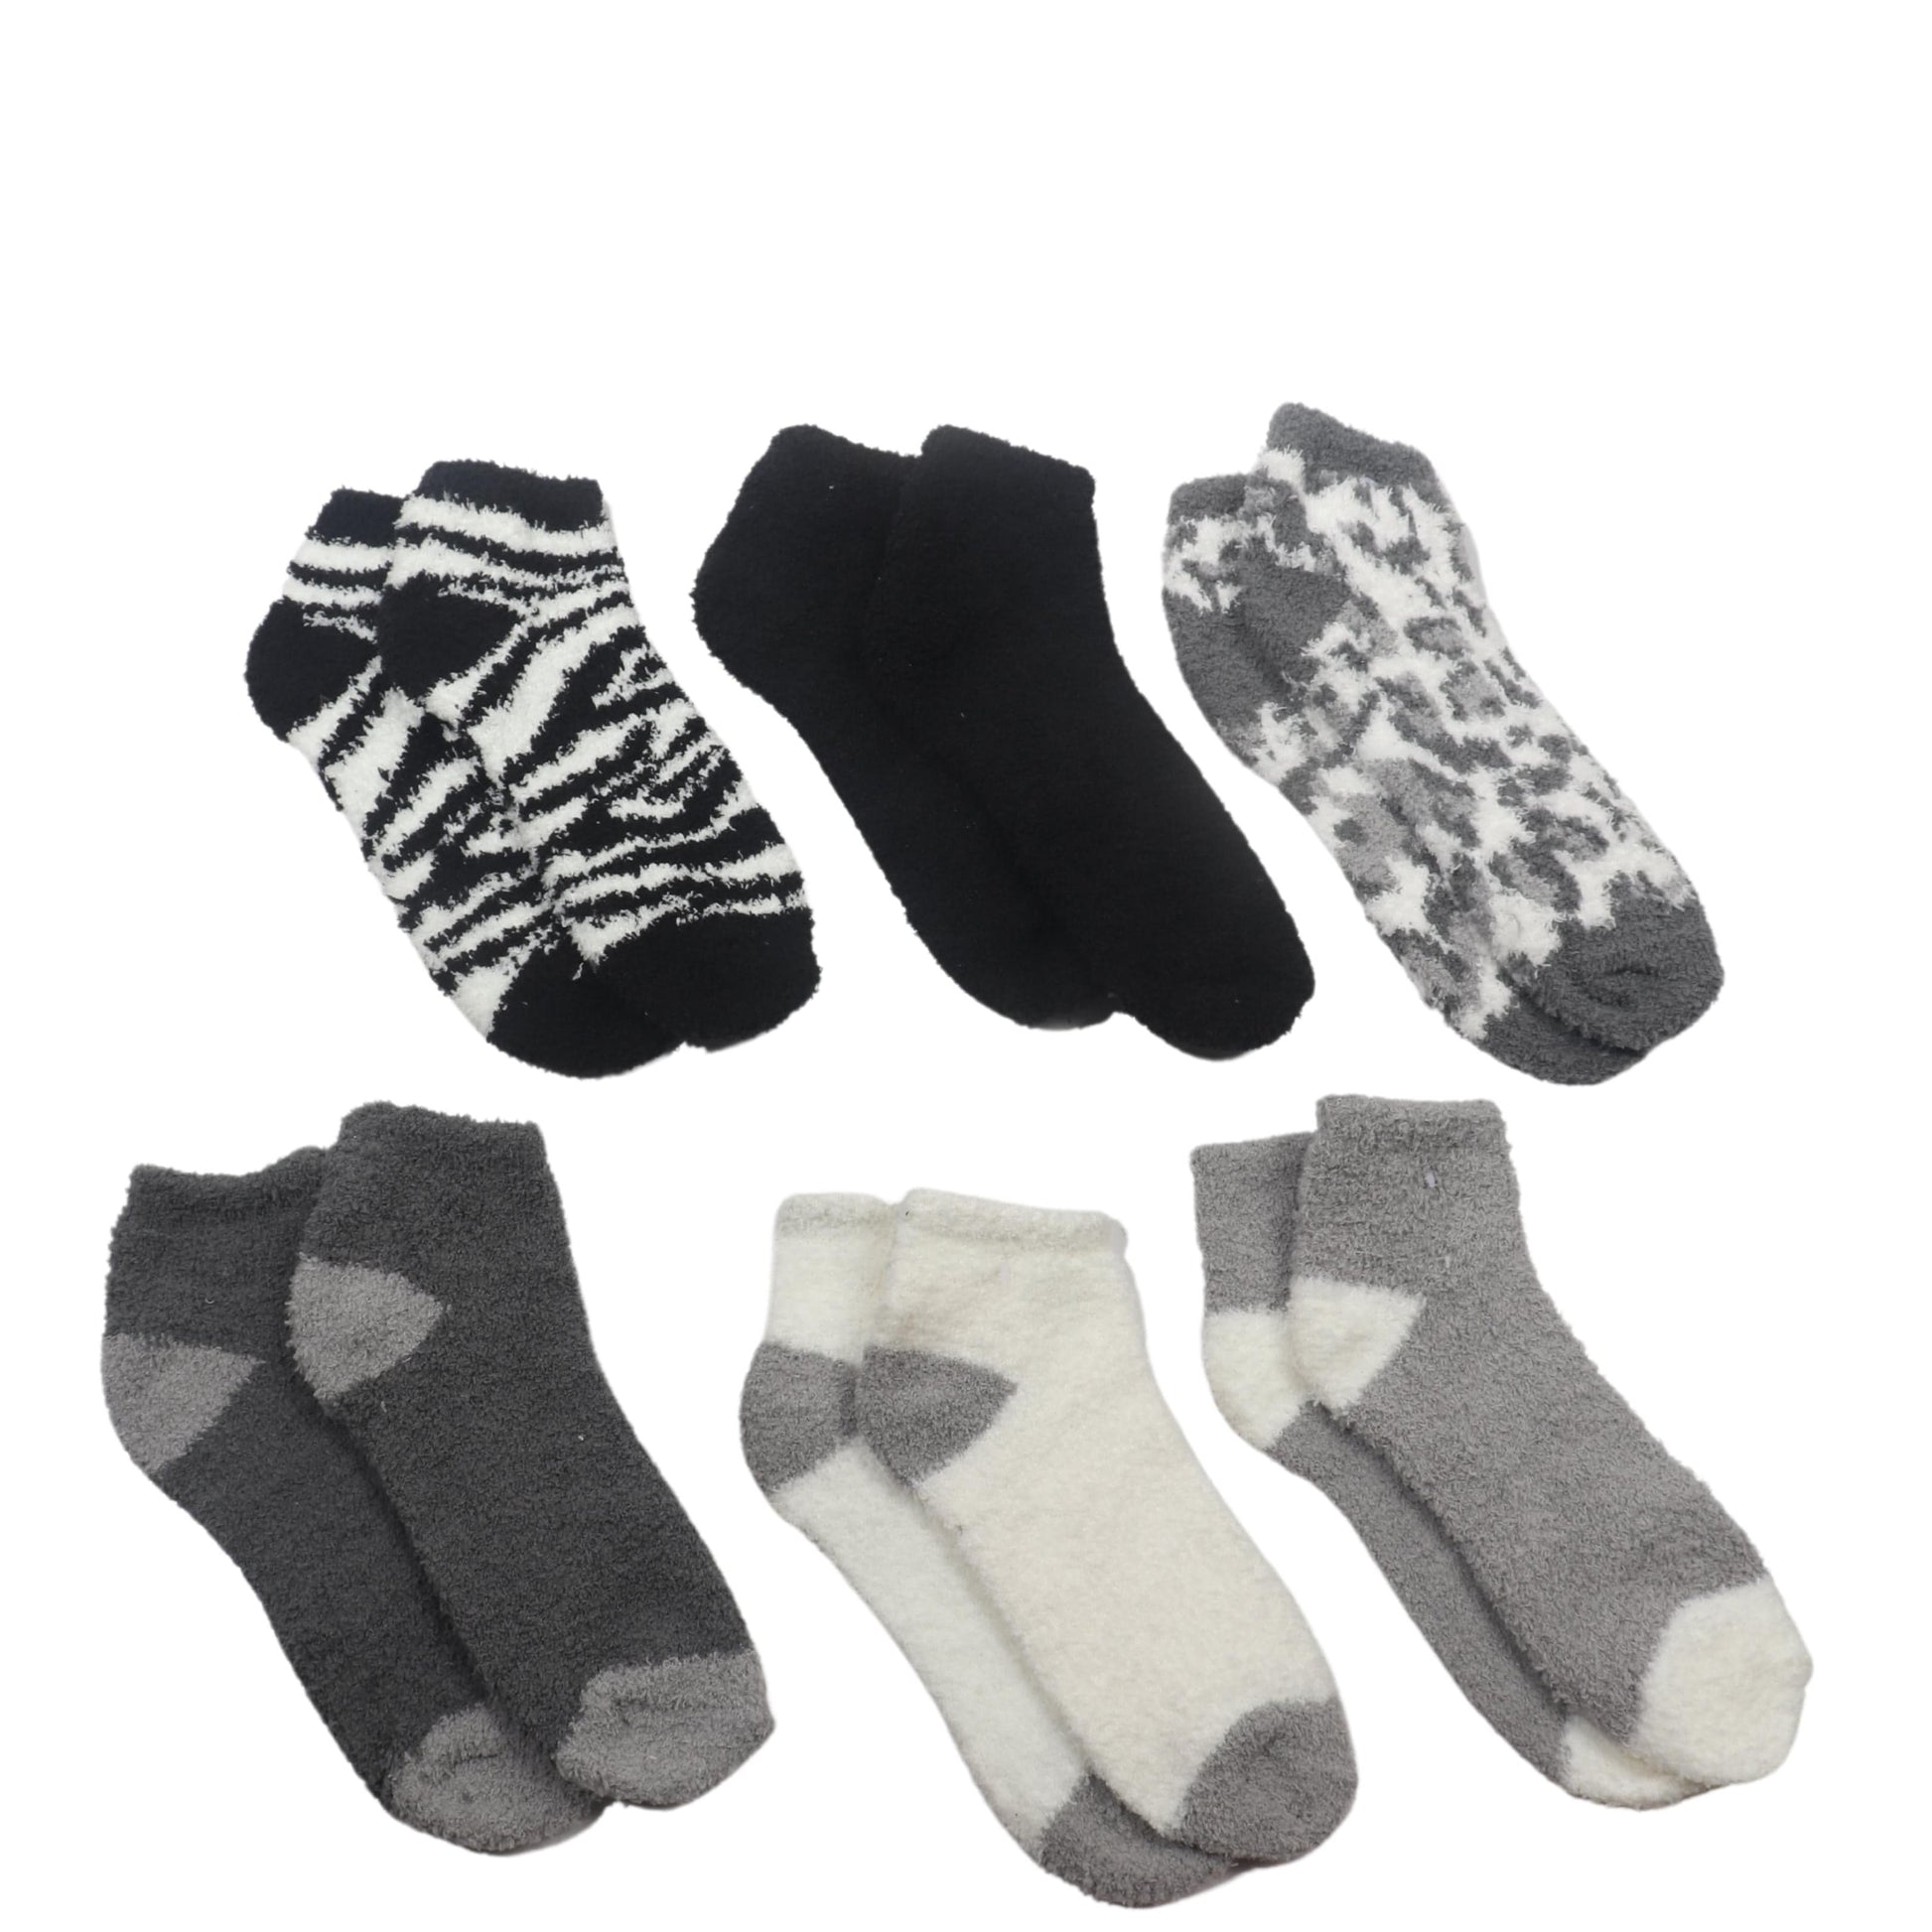 VALUE PACK Clothing Accessories 35-40 / Multi-Color VALUE PACK - Low Cut Socks Set